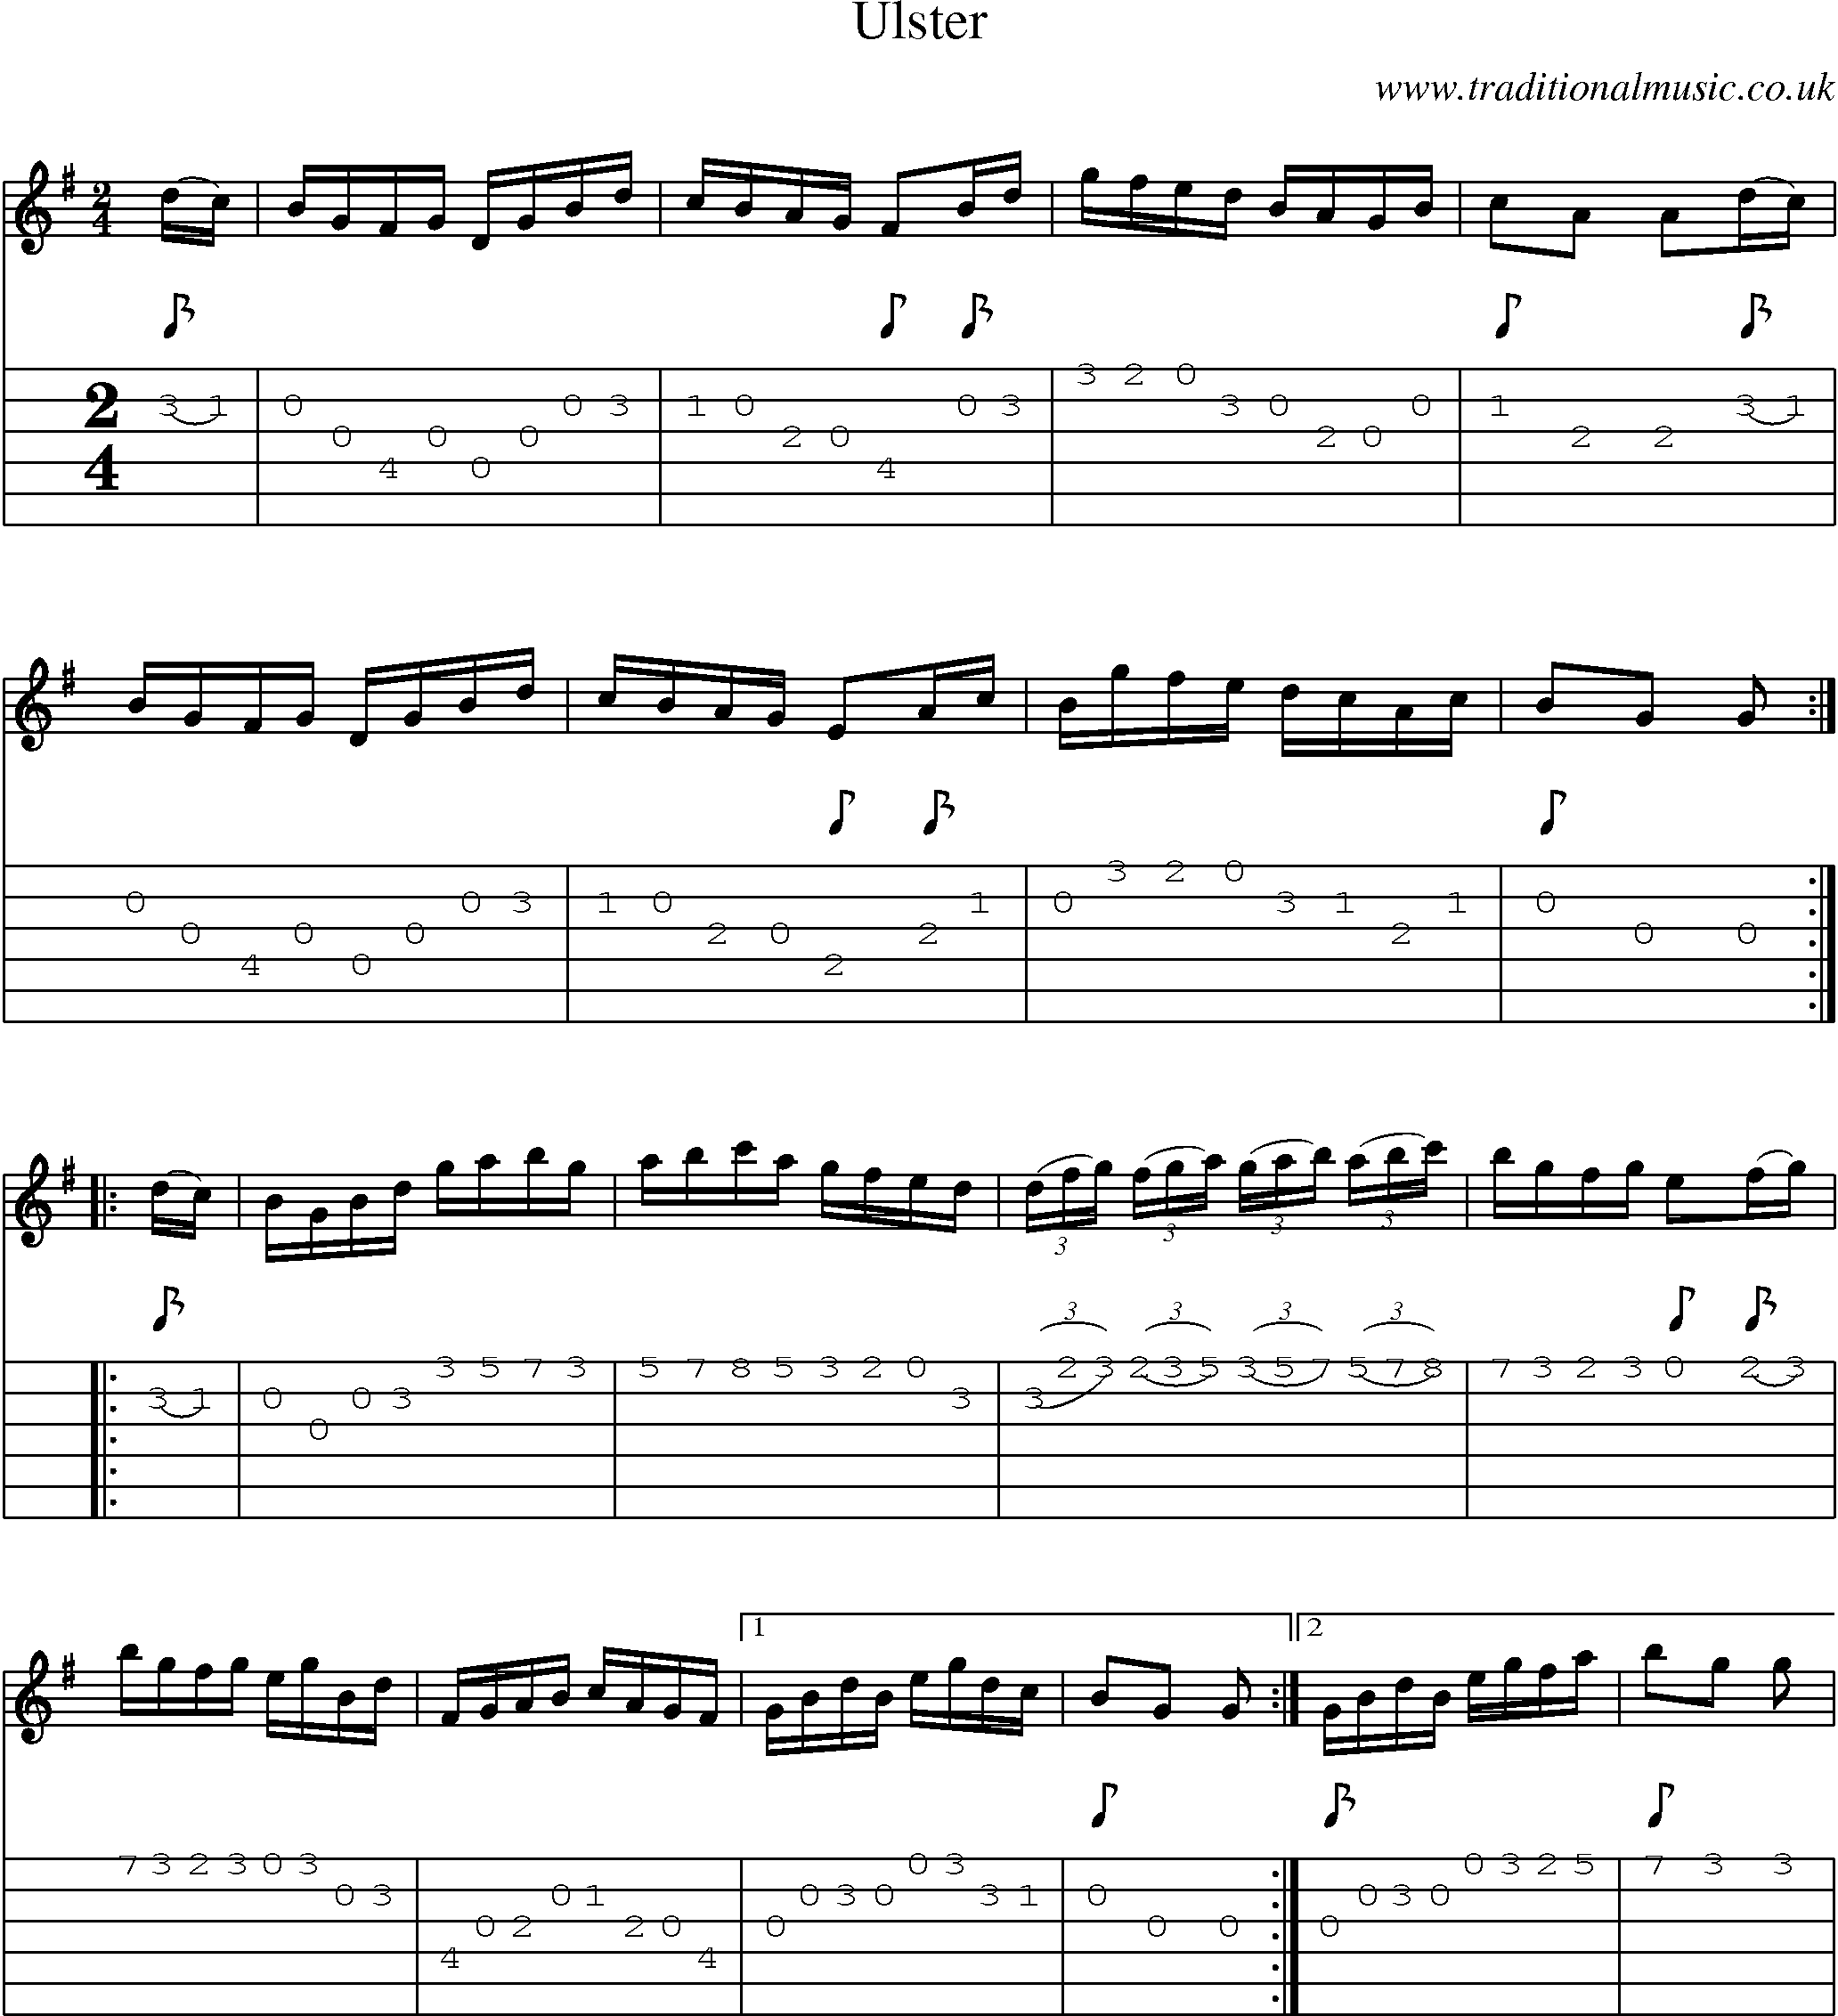 Music Score and Guitar Tabs for Ulster